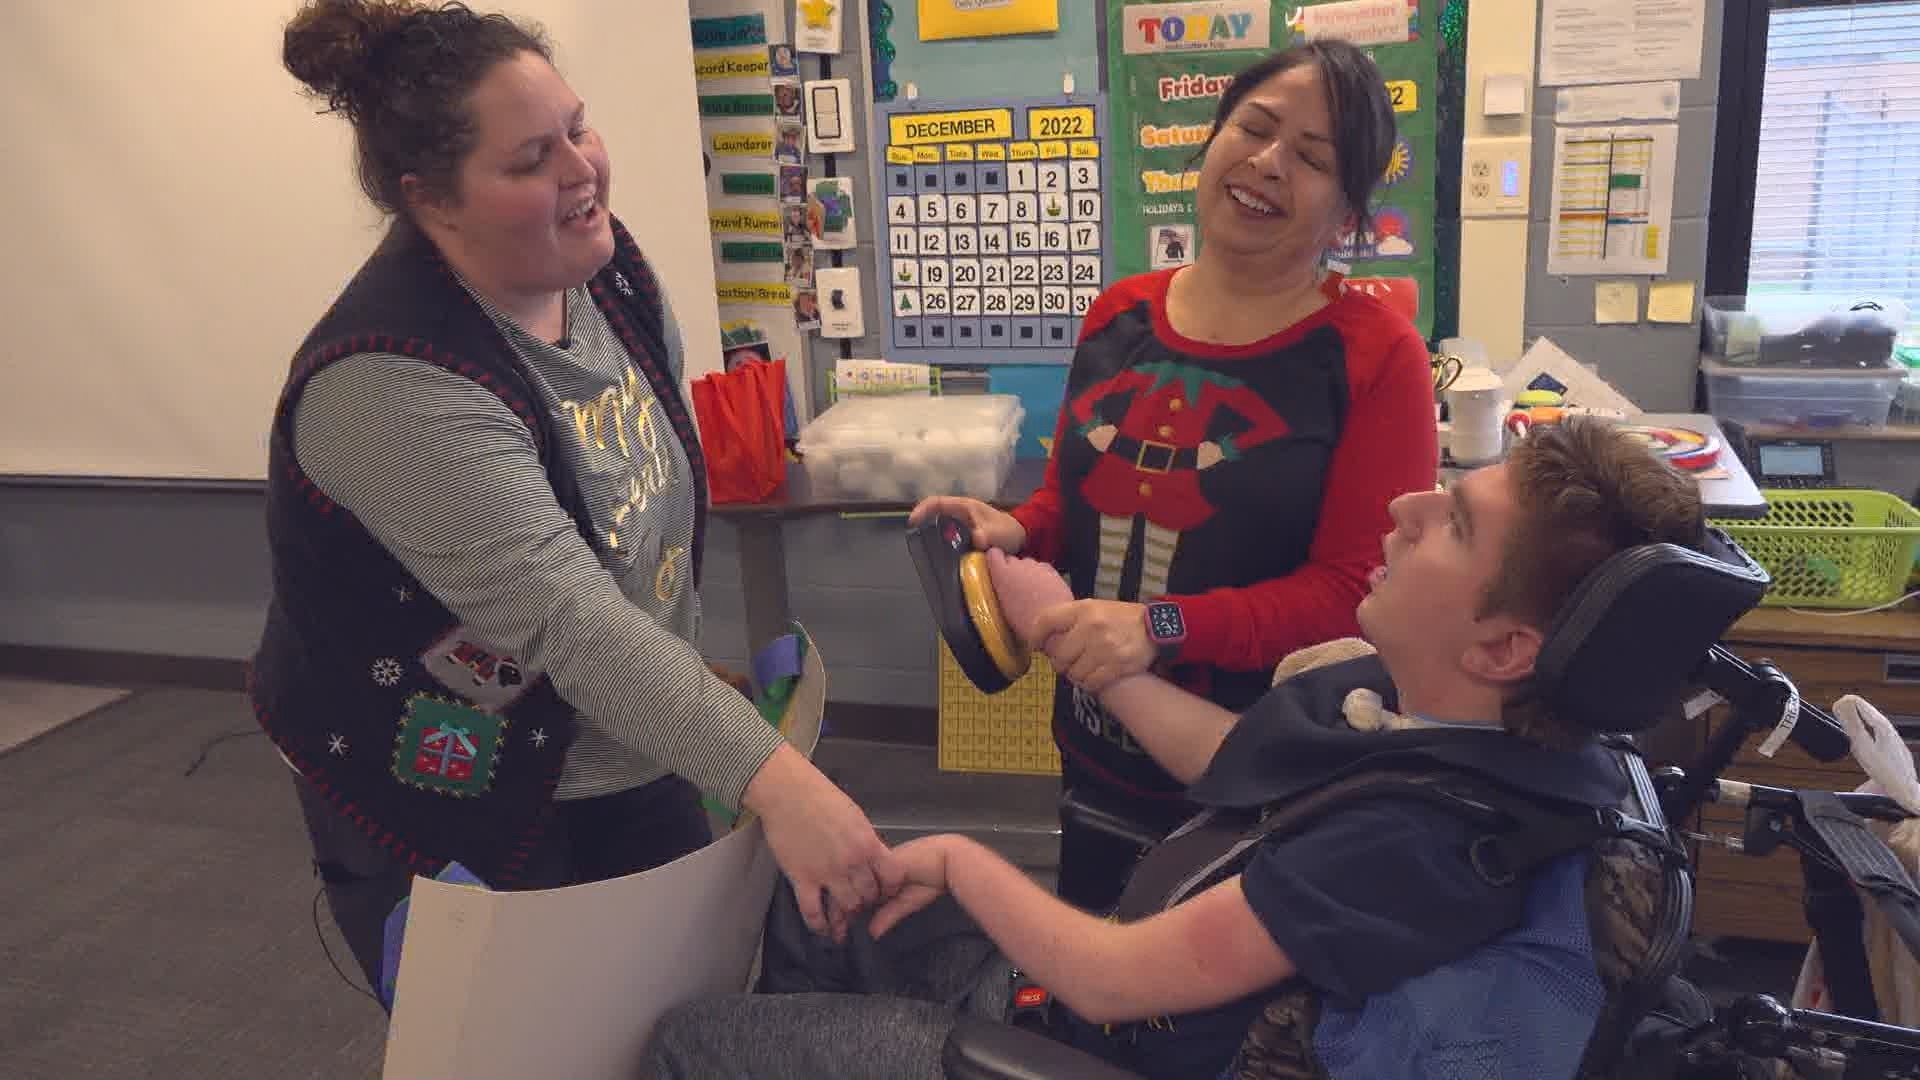 This next Teacher of the Week serves a very small but unique portion of students in Kent County making for a very special surprise!